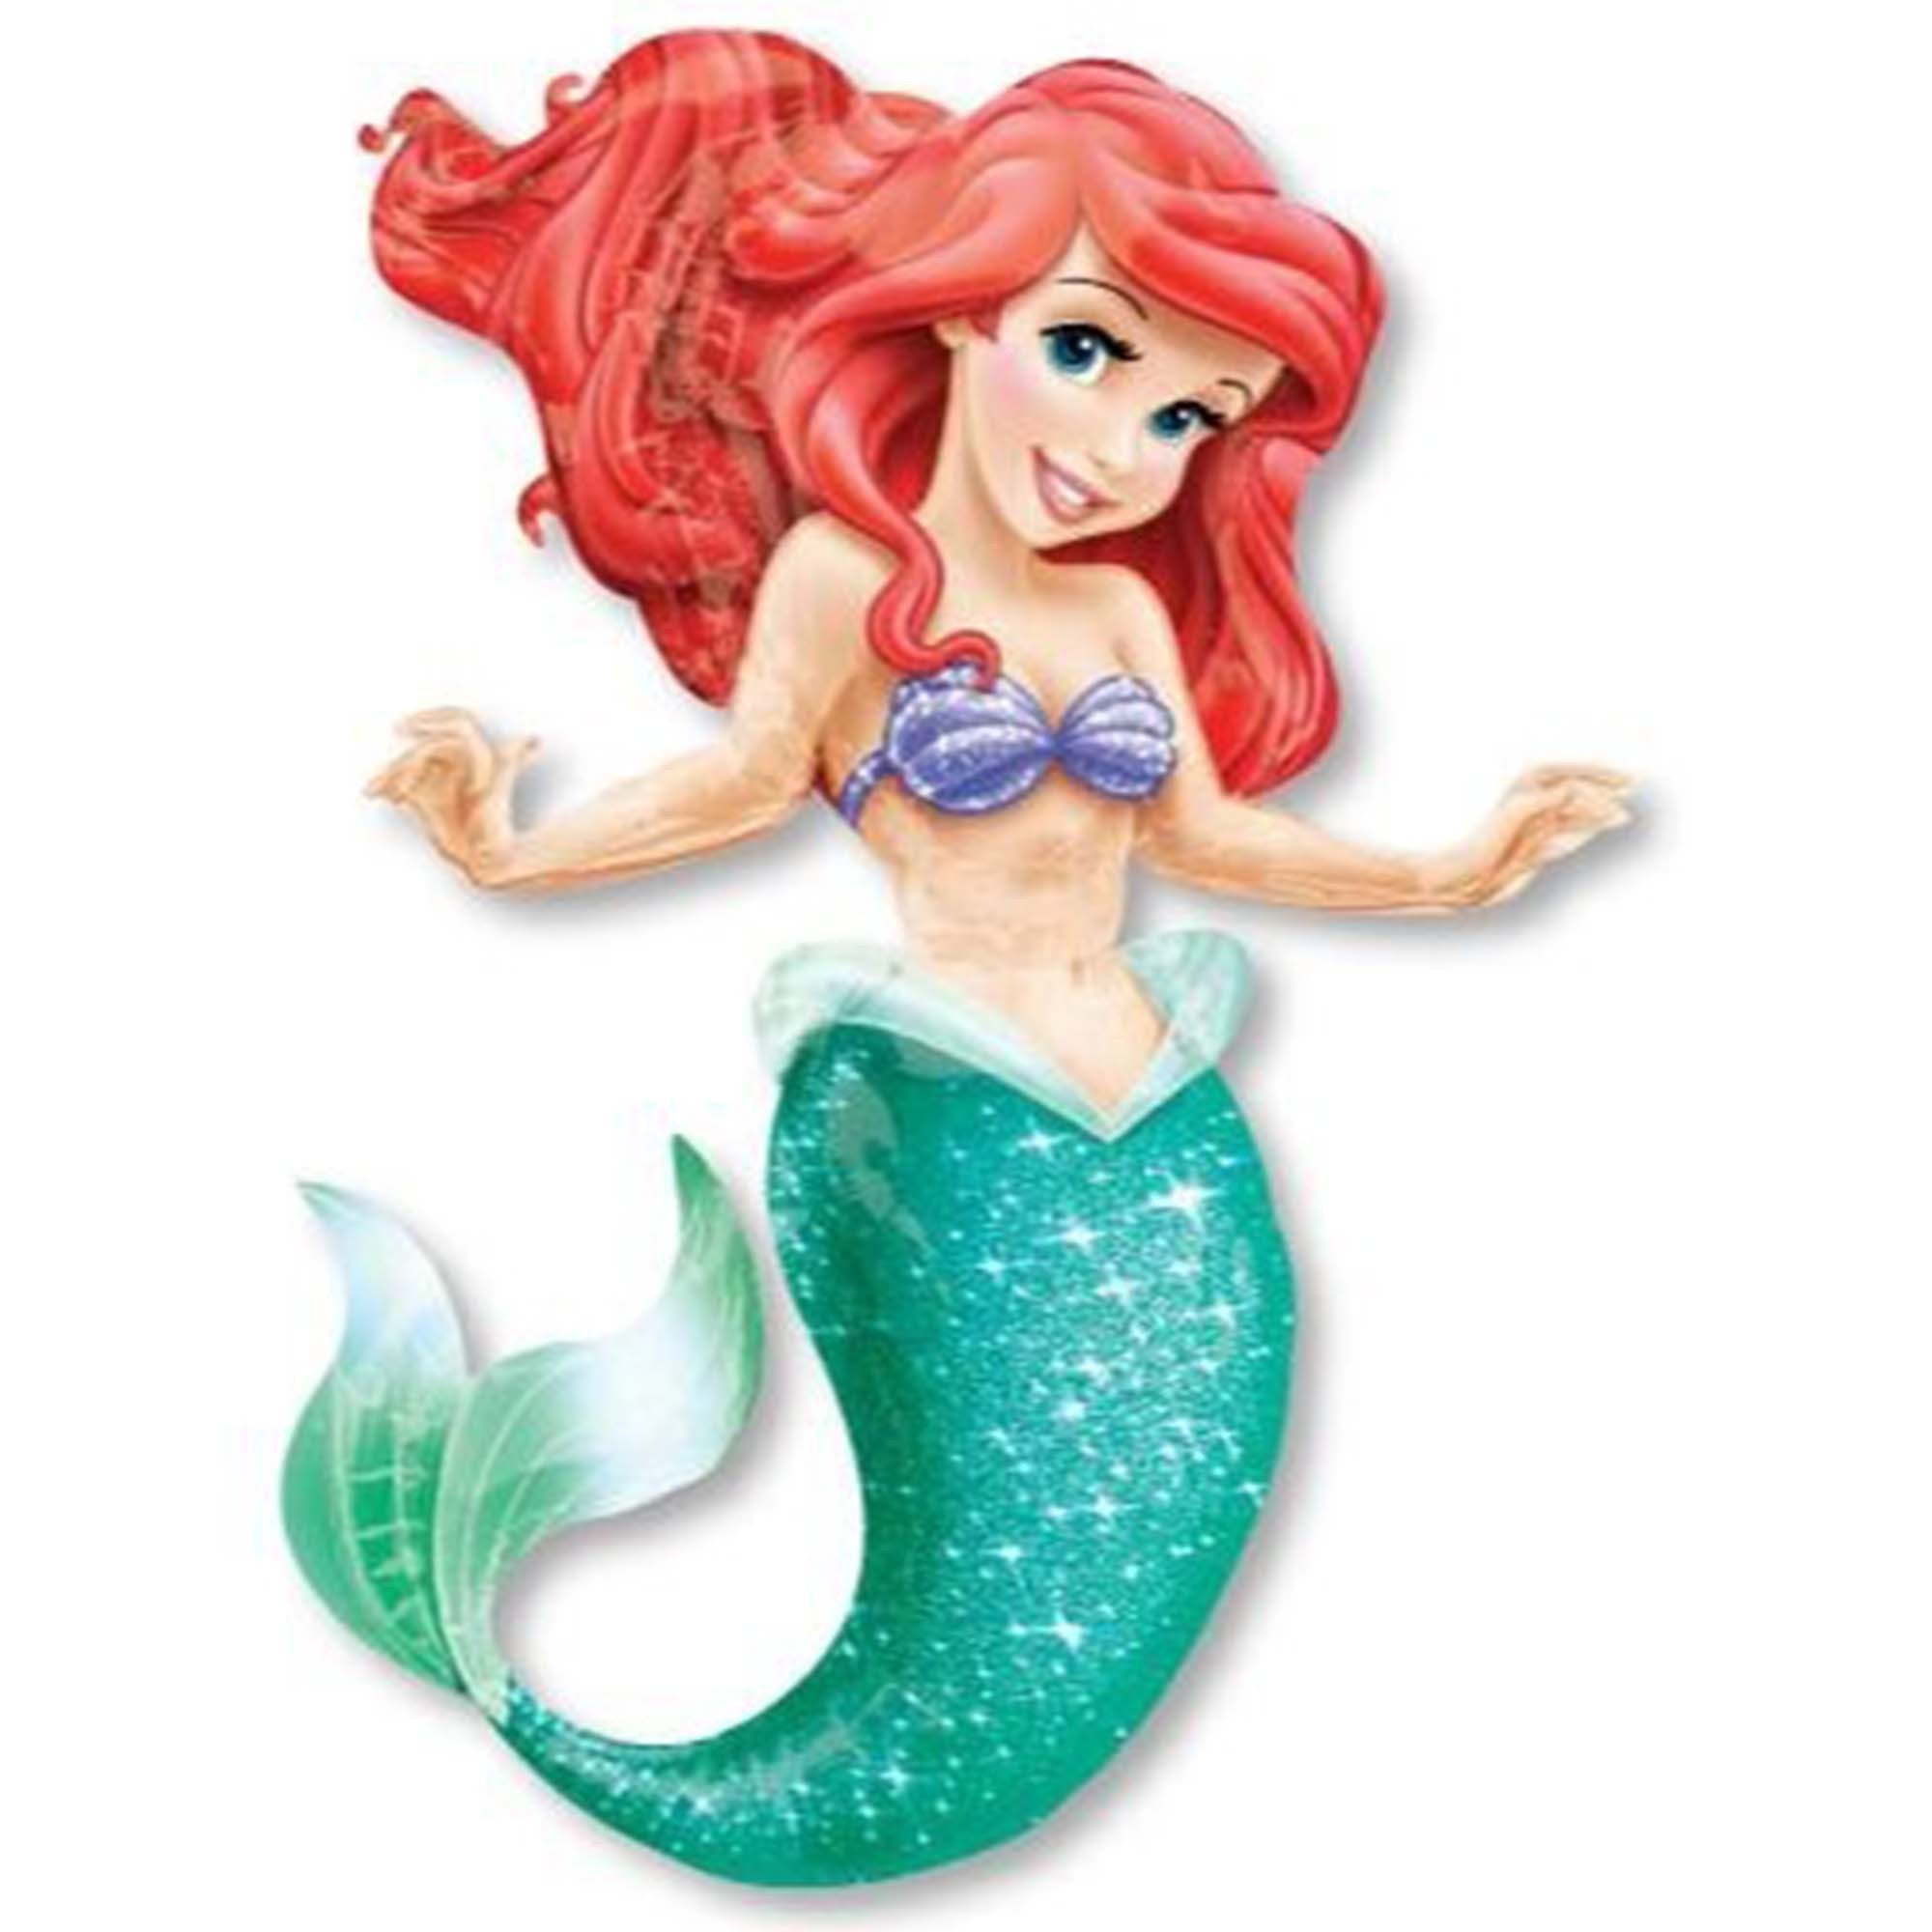 Make a splash at your next celebration with Party Empress' Ariel Dream Big Party Supplies! Perfect for birthdays, themed parties, and special events, our Ariel collection brings the beloved Disney princess and her undersea world to life.